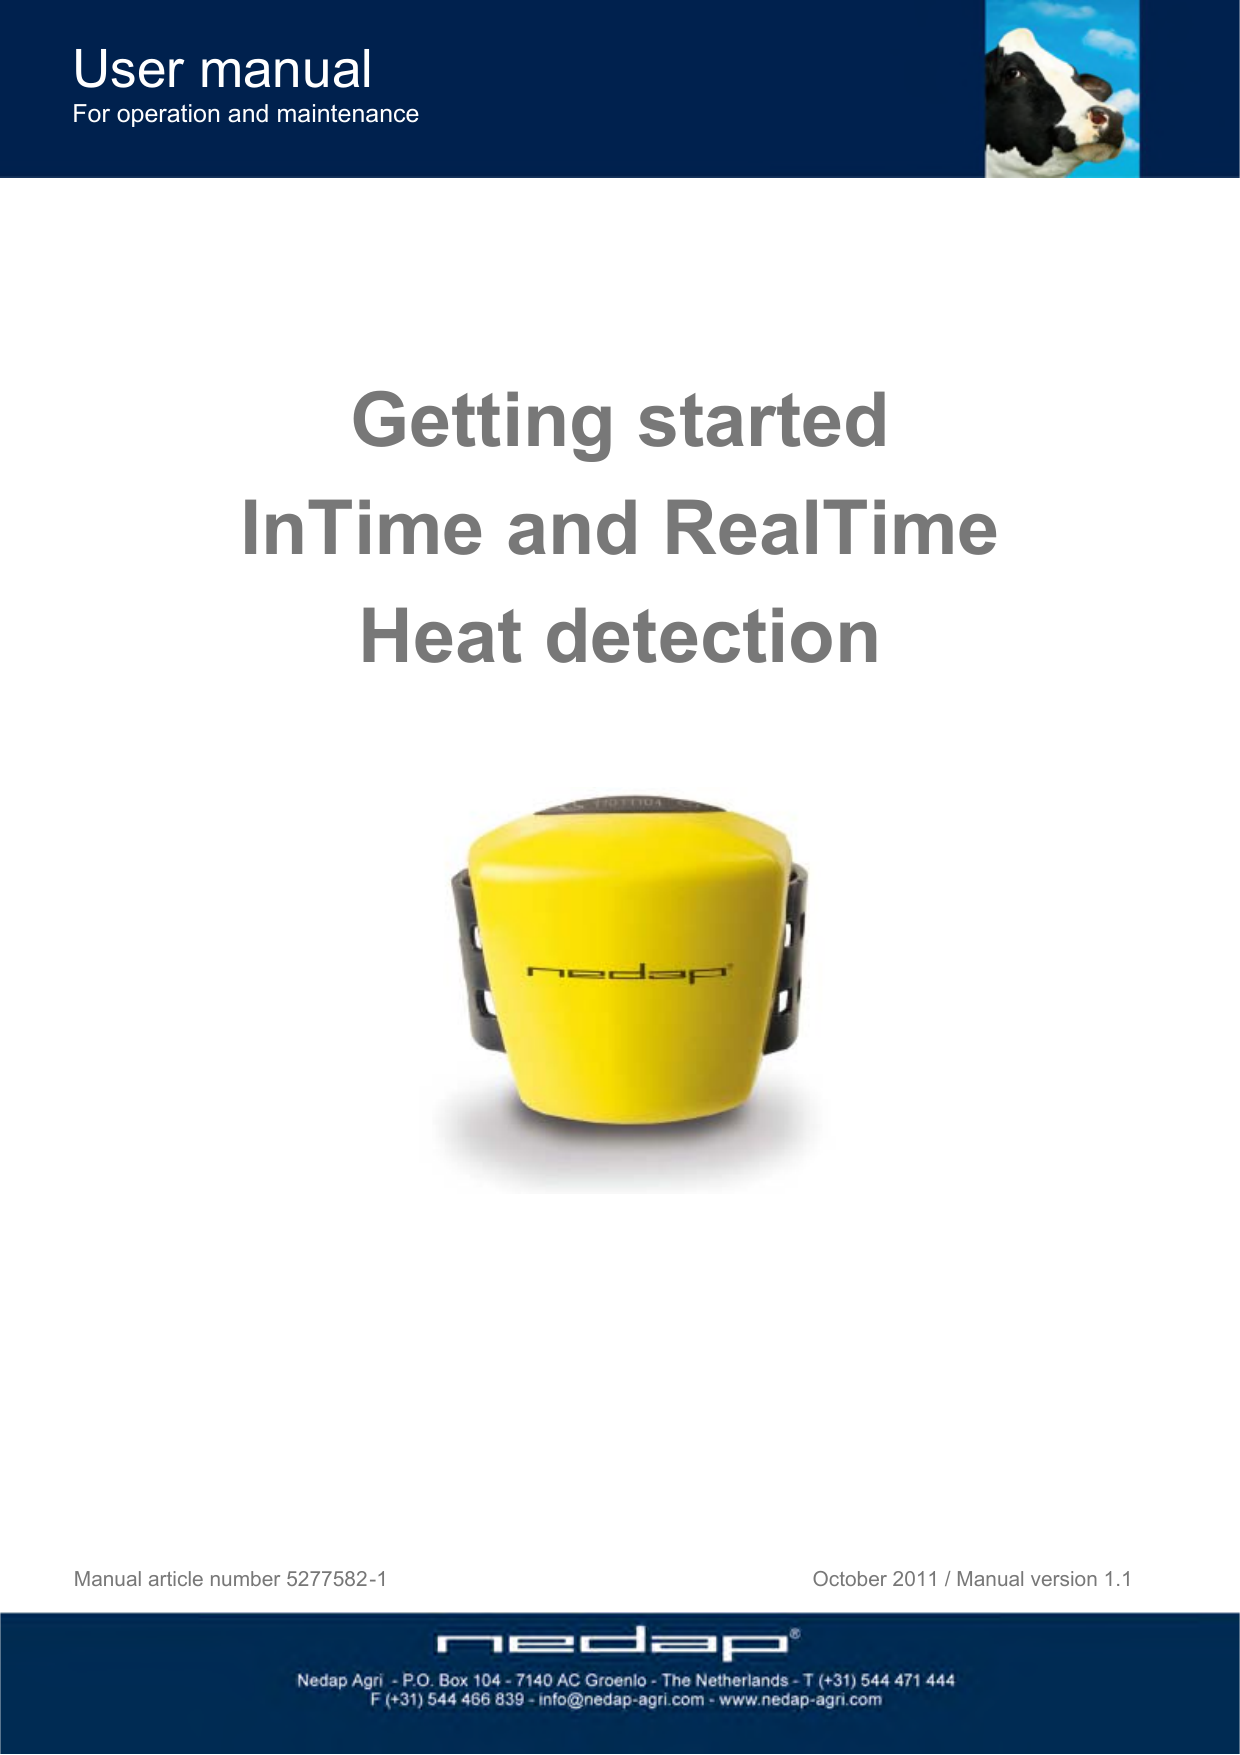  Getting started InTime and RealTime  Heat detection             Manual article number 5277582 -1      October 2011 / Manual version 1.1User manual For operation and maintenance 